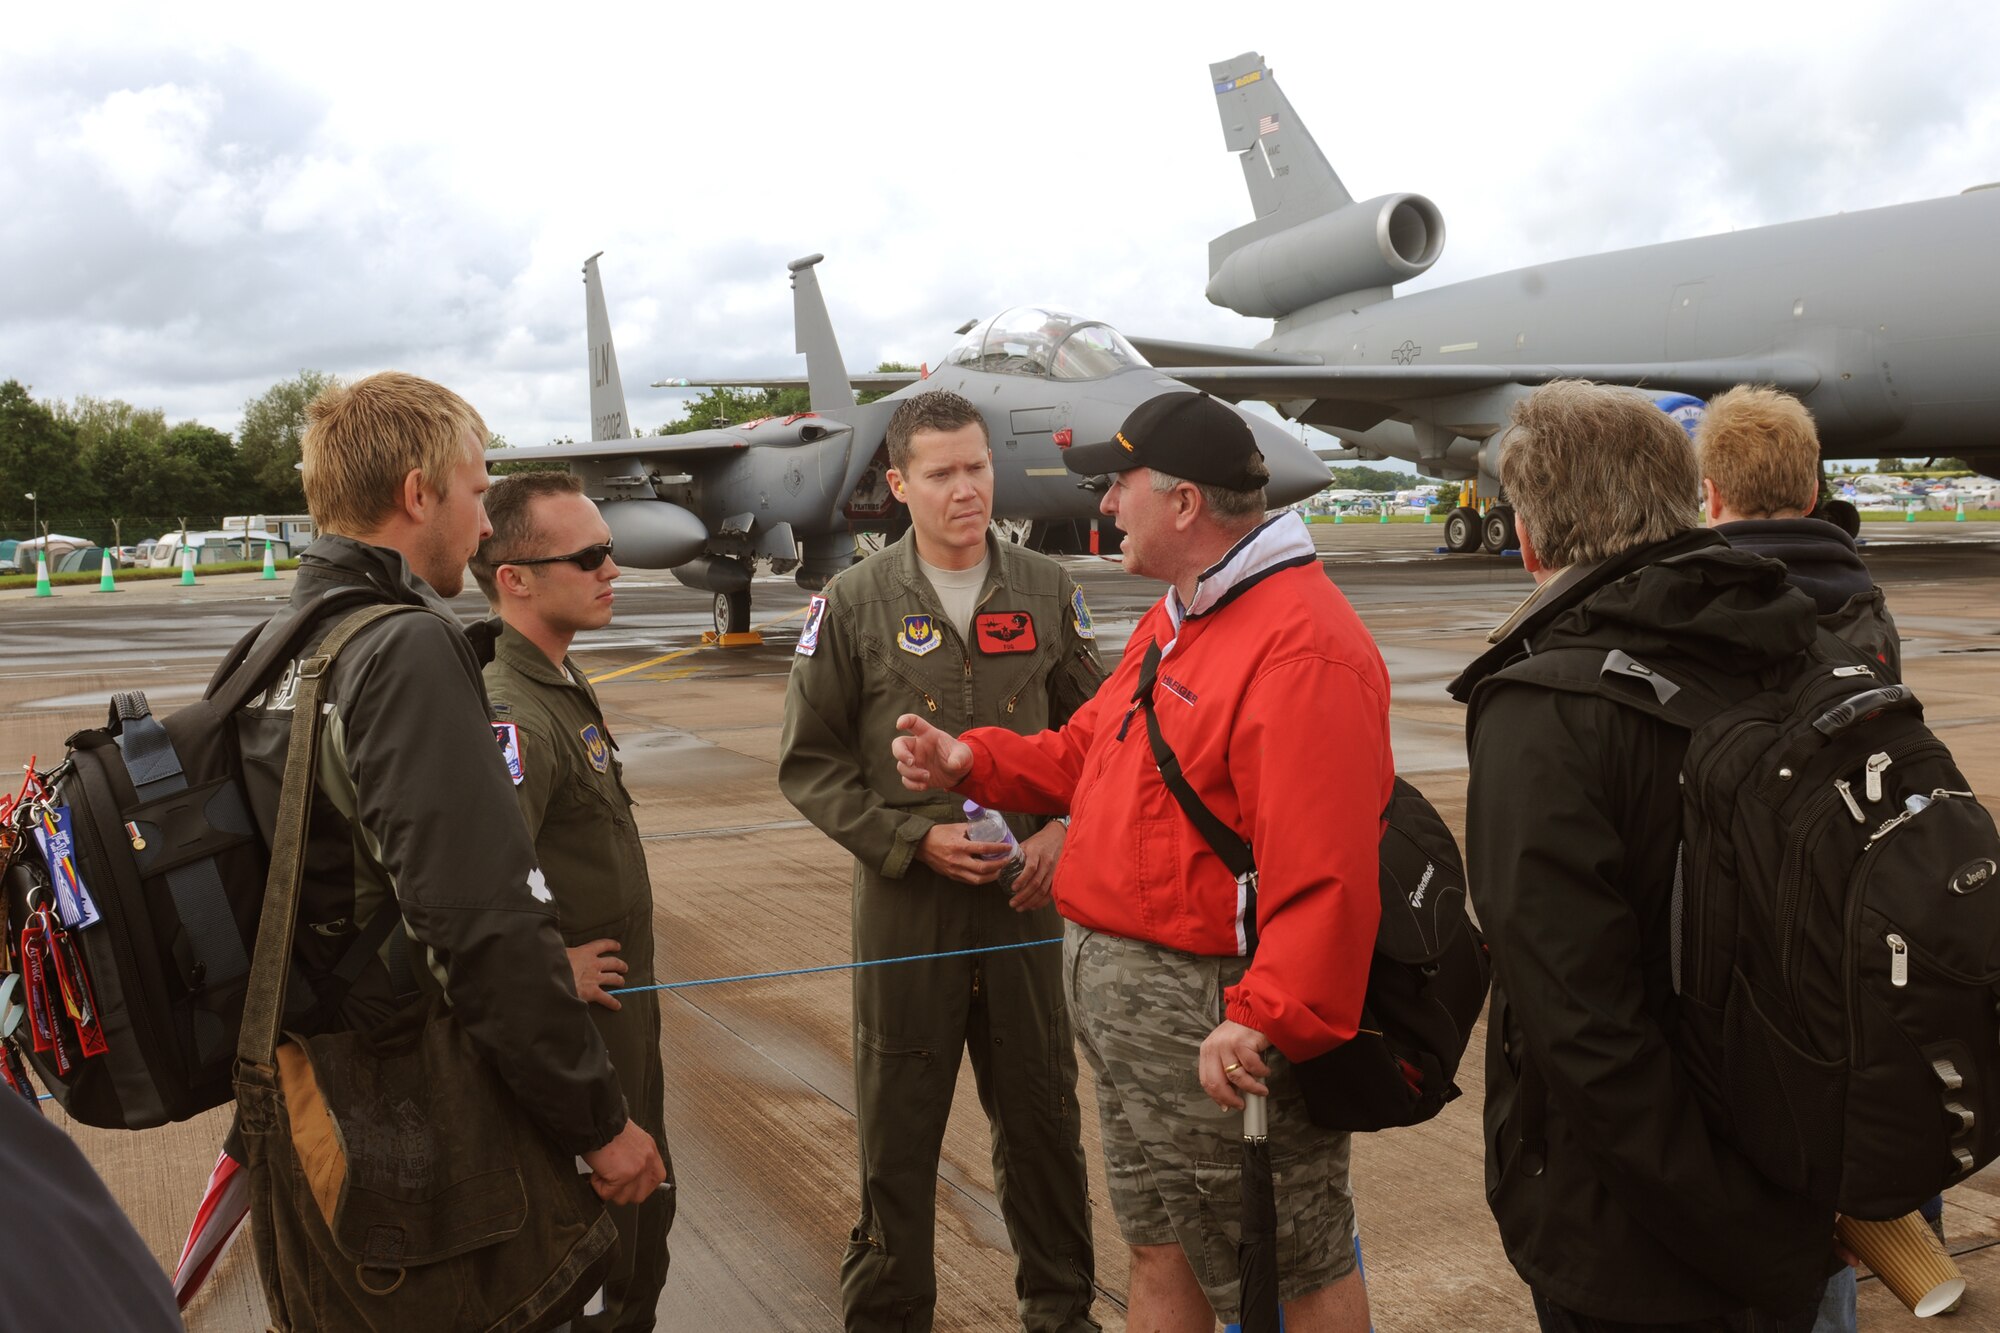 RAF FAIRFORD, United Kingdom - Ian Warner, of Sharnford, Leicestershire, talks with Maj. Jon Lee and 1st Lt. Adam Thompson, 494th Fighter Squadron, about squadron patches during the Royal International Air Tattoo at RAF Fairford. Lee and Thompson flew an F-15E Strike Eagle from RAF Lakenheath to display during RIAT. (U.S. Air Force photo by Capt. Brian Maguire)